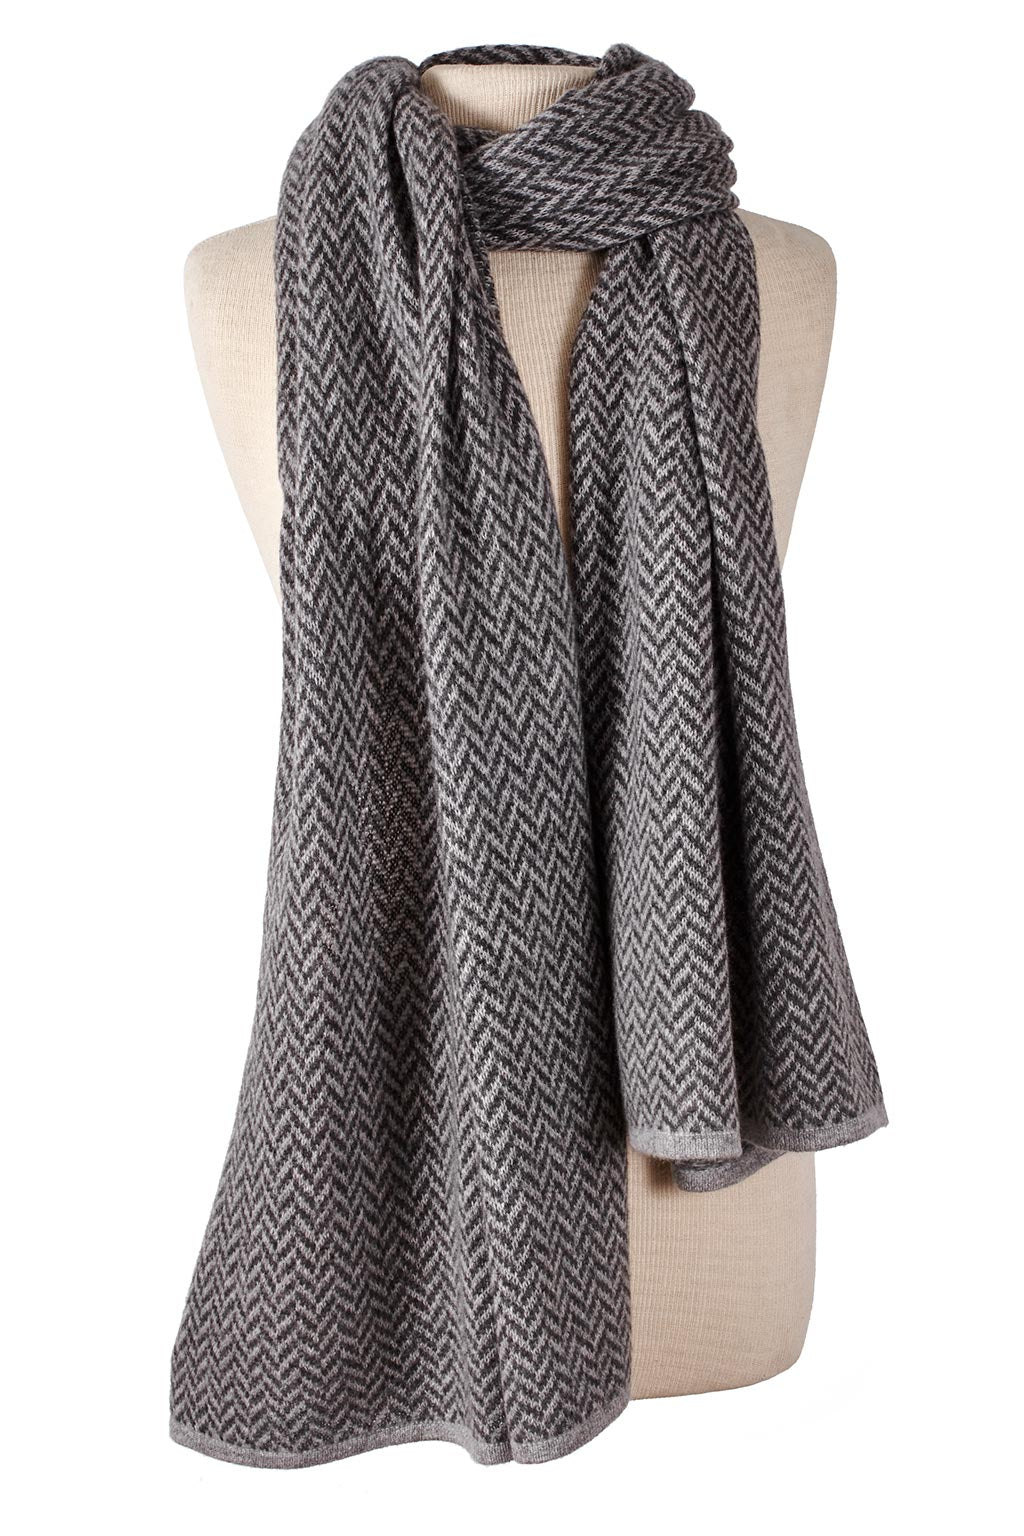 Alpine Cashmere Herringbone Travel Wrap in Charcoal and Pewter Gray